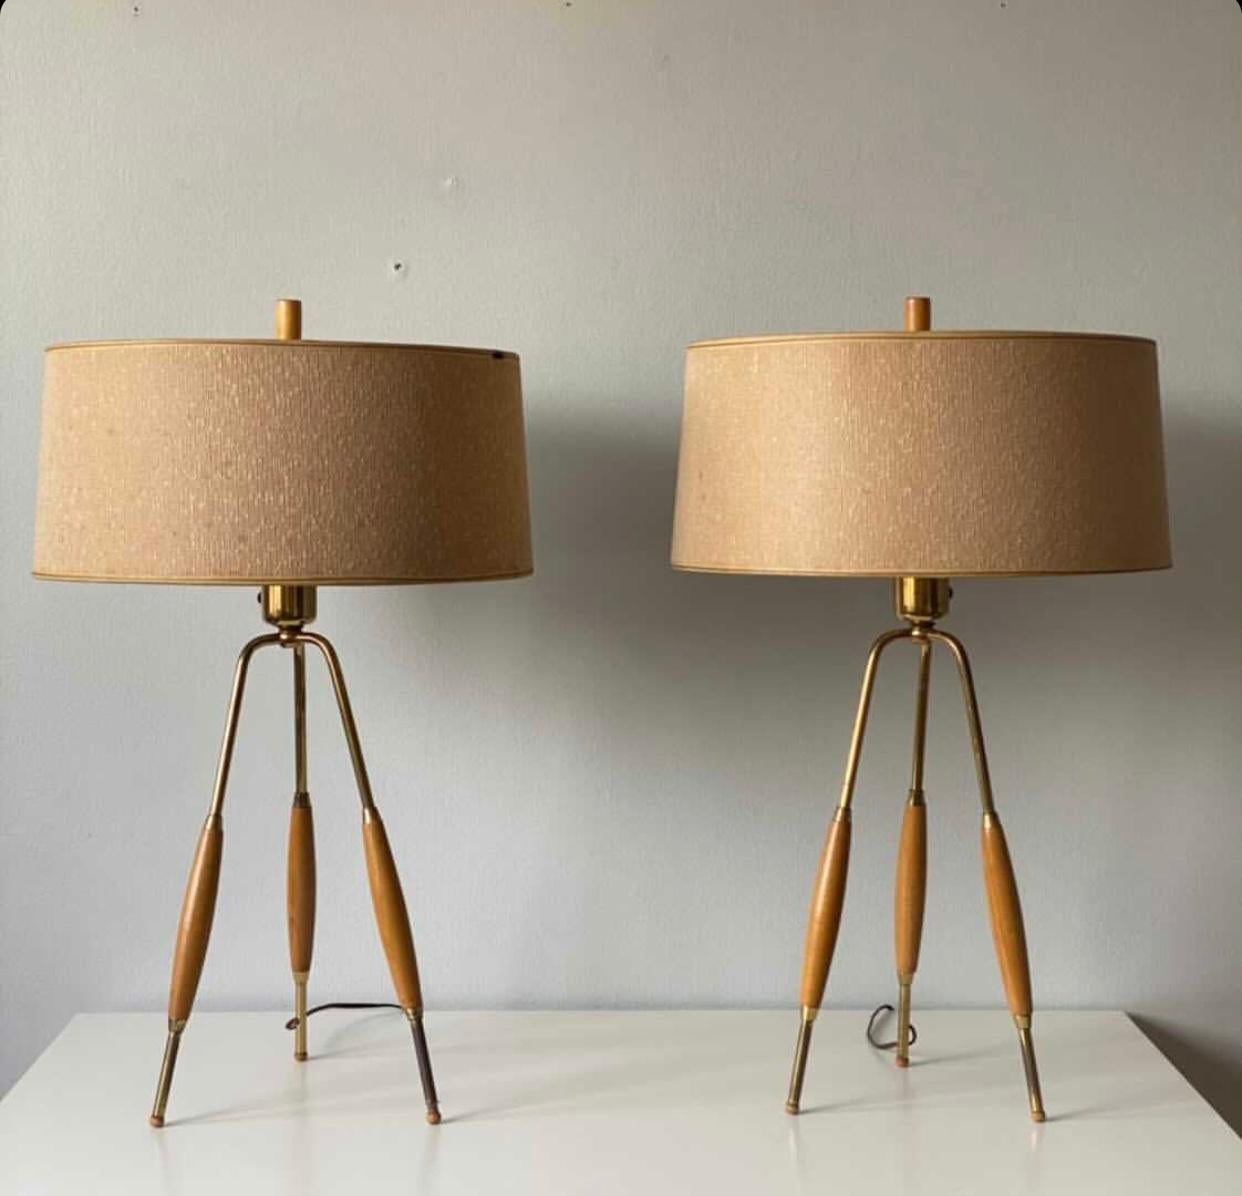 Amazing set of original Gerald Thurston tripod lamps (larger & rarer version) with milk glass reflectors. Made by Lightolier. Original shades and finials. Original wiring. Lovely walnut spindles with long brass legs. Normal wear. Slight splits in